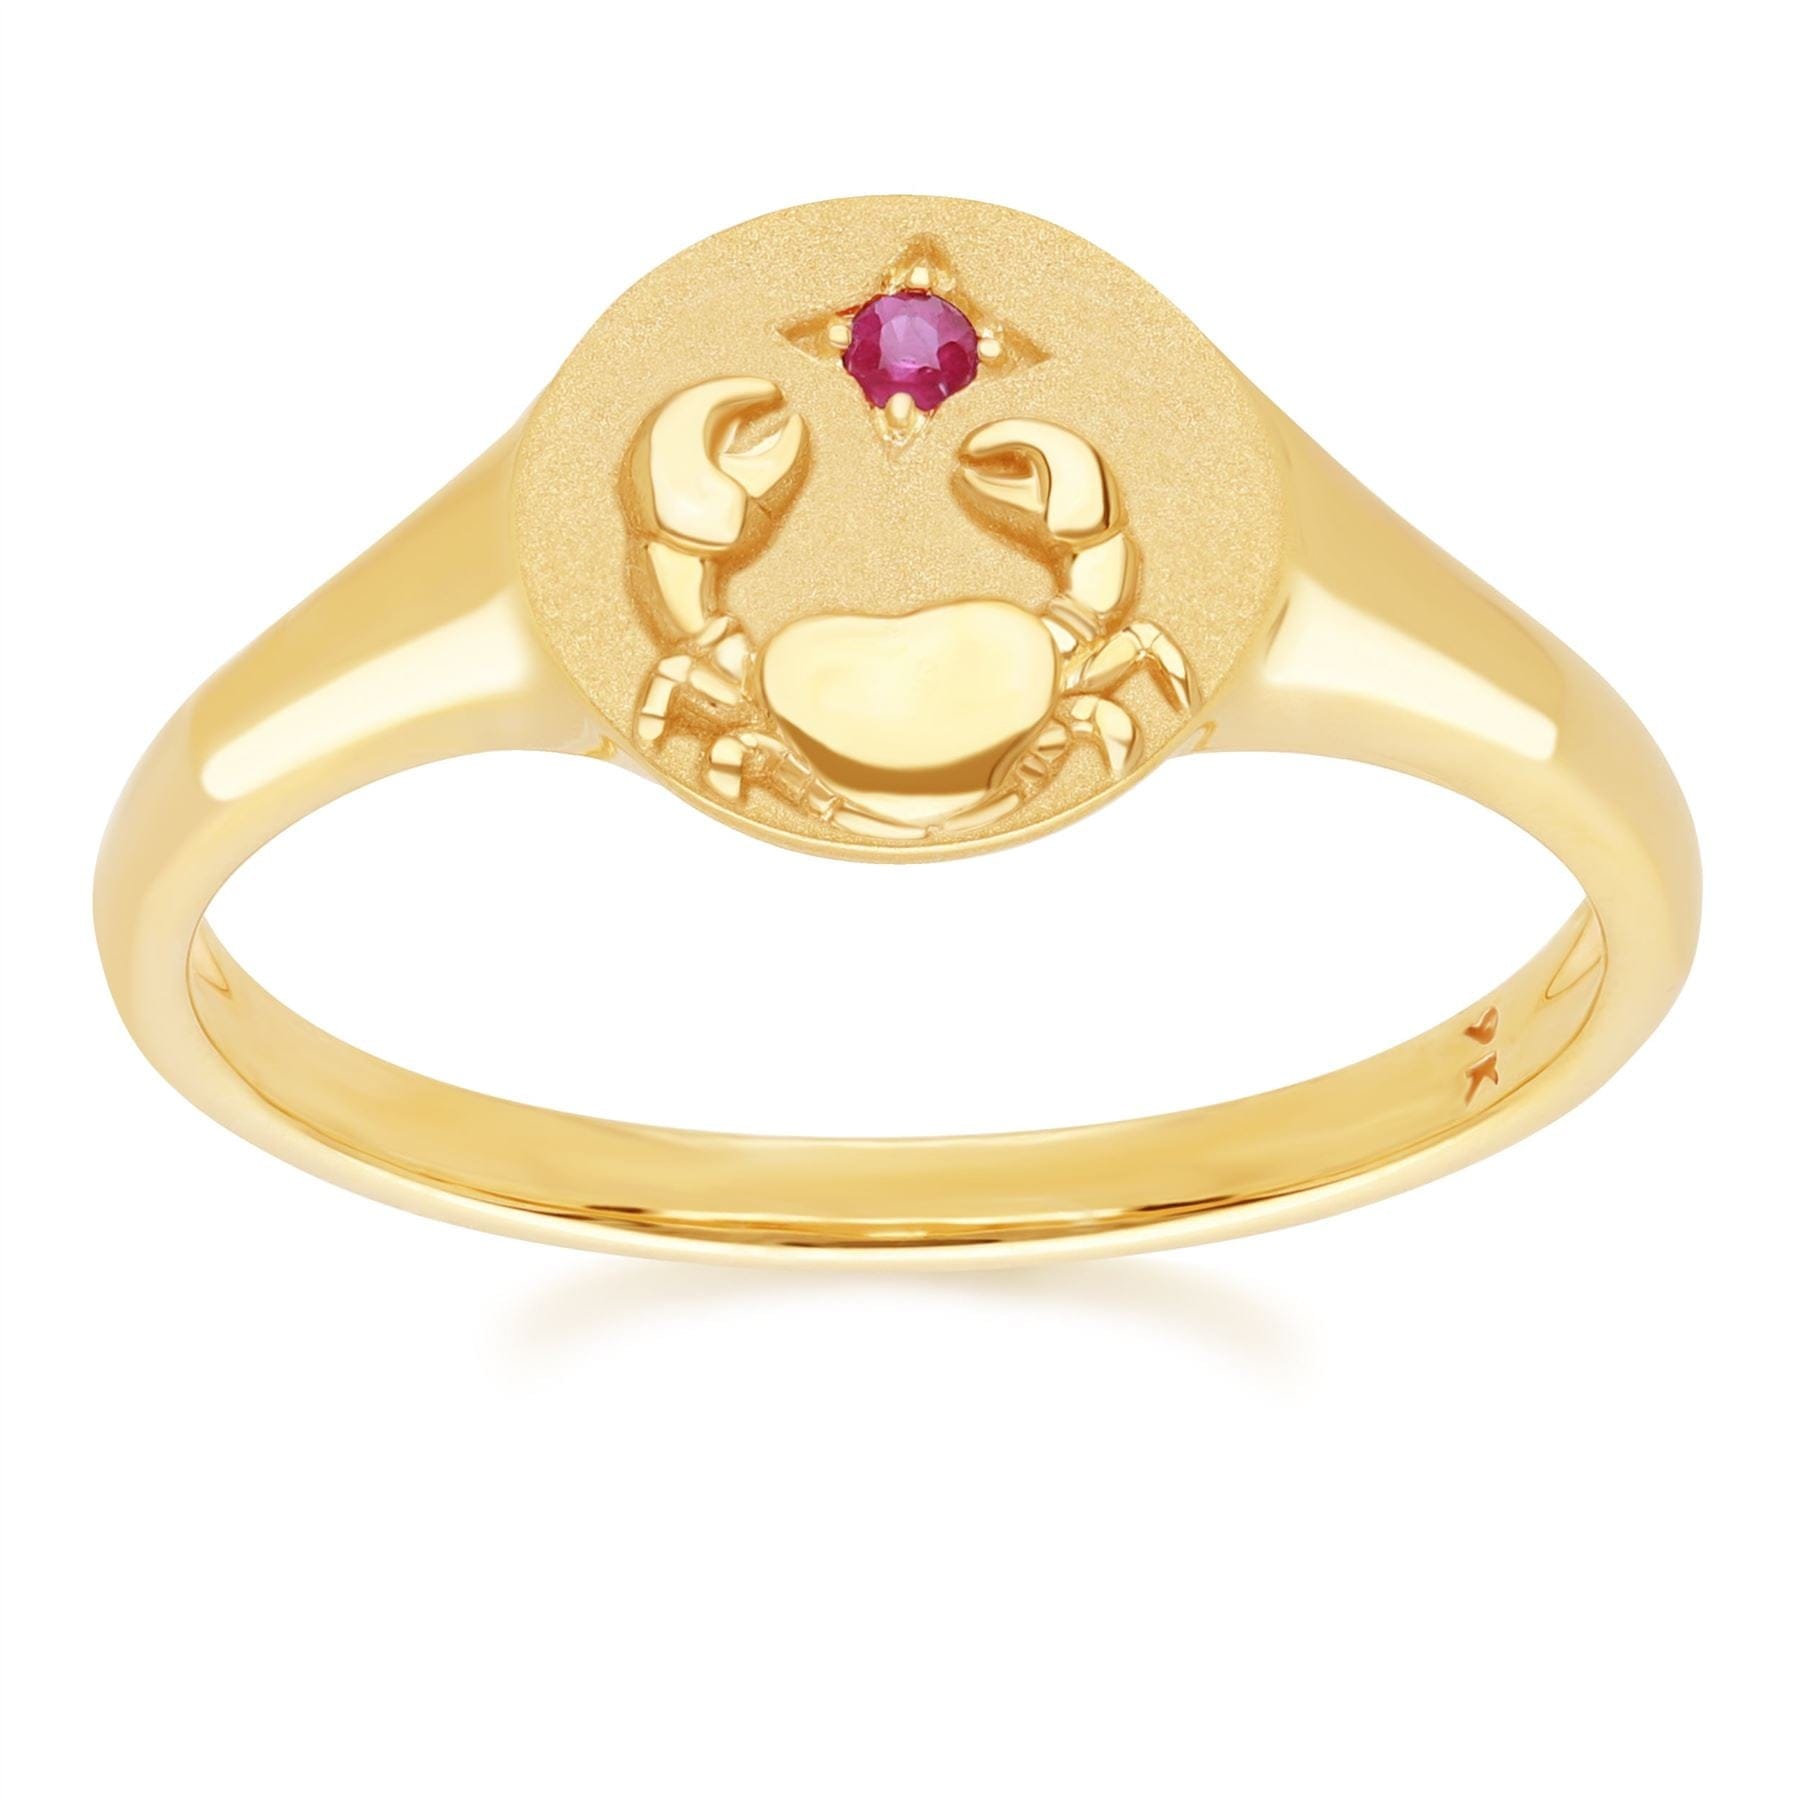 "Zodiac Ruby Cancer Signet Ring In 9ct Yellow GoldFront  135R2085019